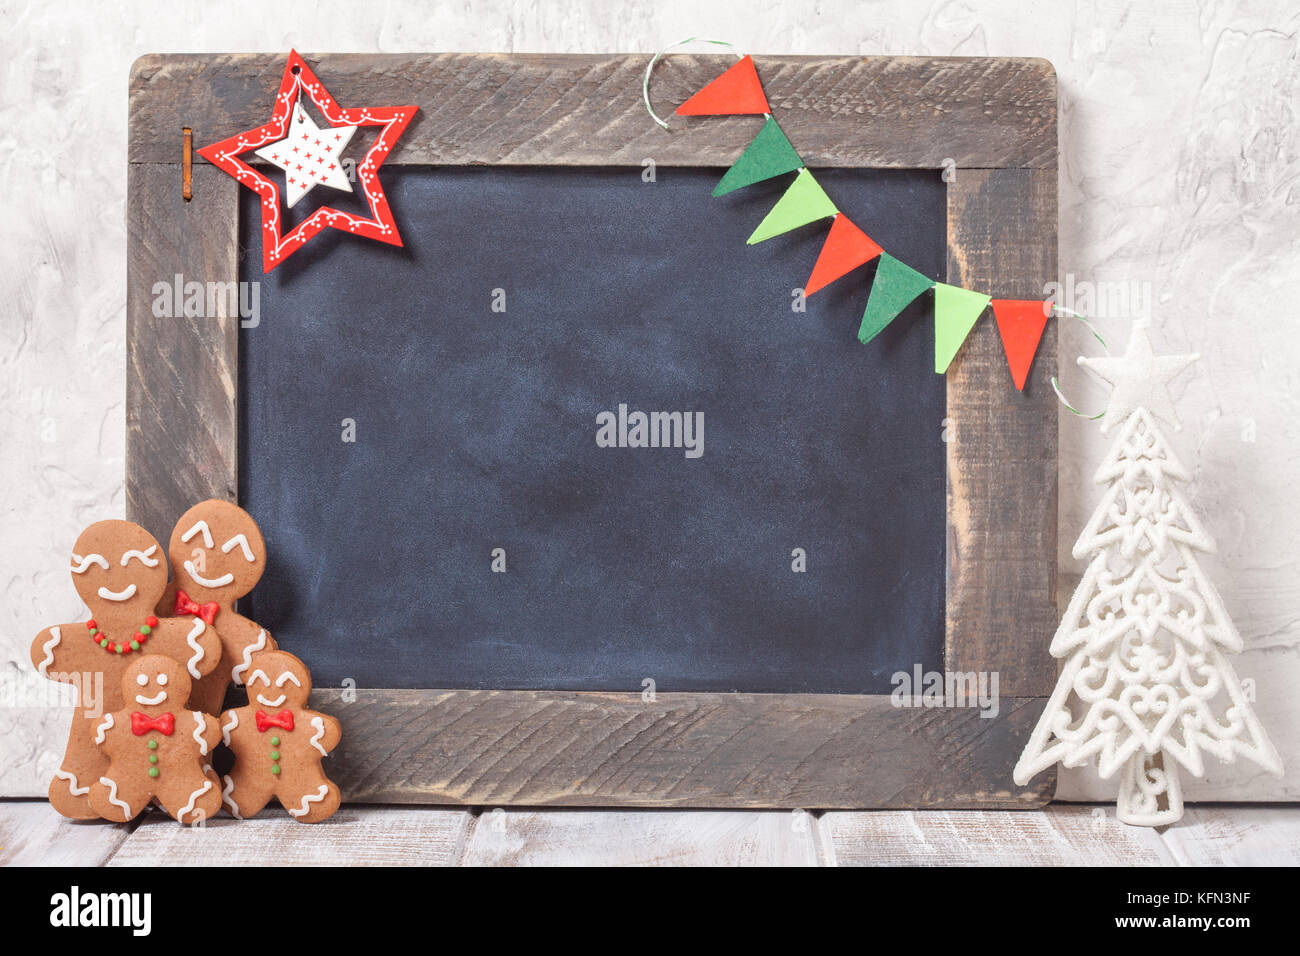 Gingerbread man family and chalkboard Stock Photo